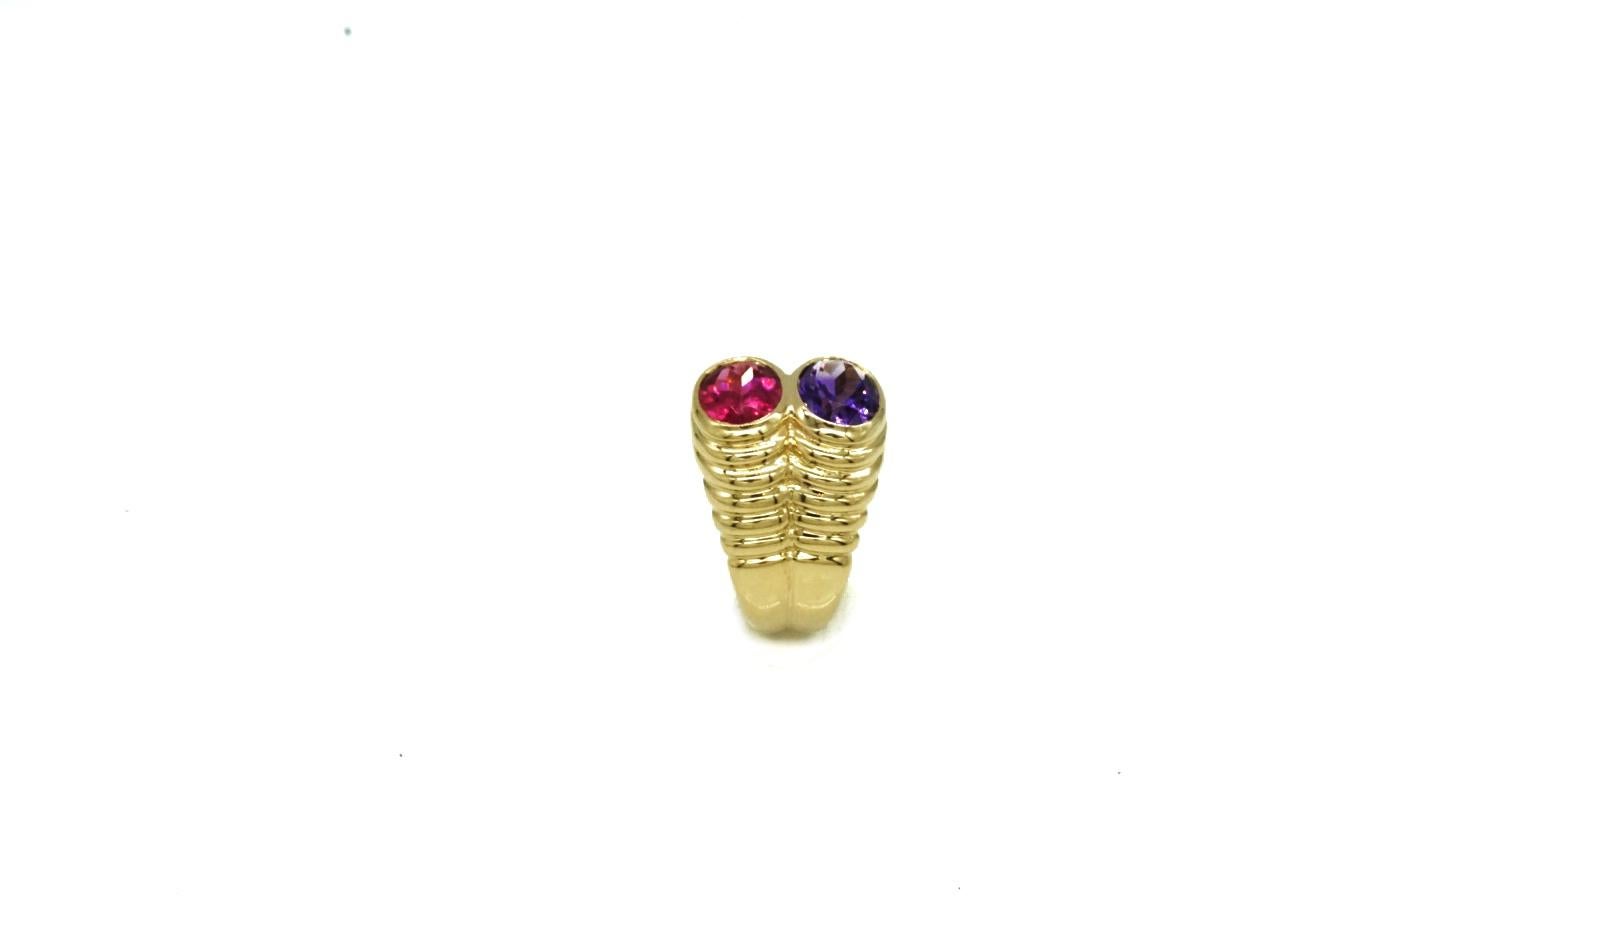 A Bulgari Amethyst and red Tourmaline Ring mounted on 18k Yellow Gold. Made in Italy, circa 1980